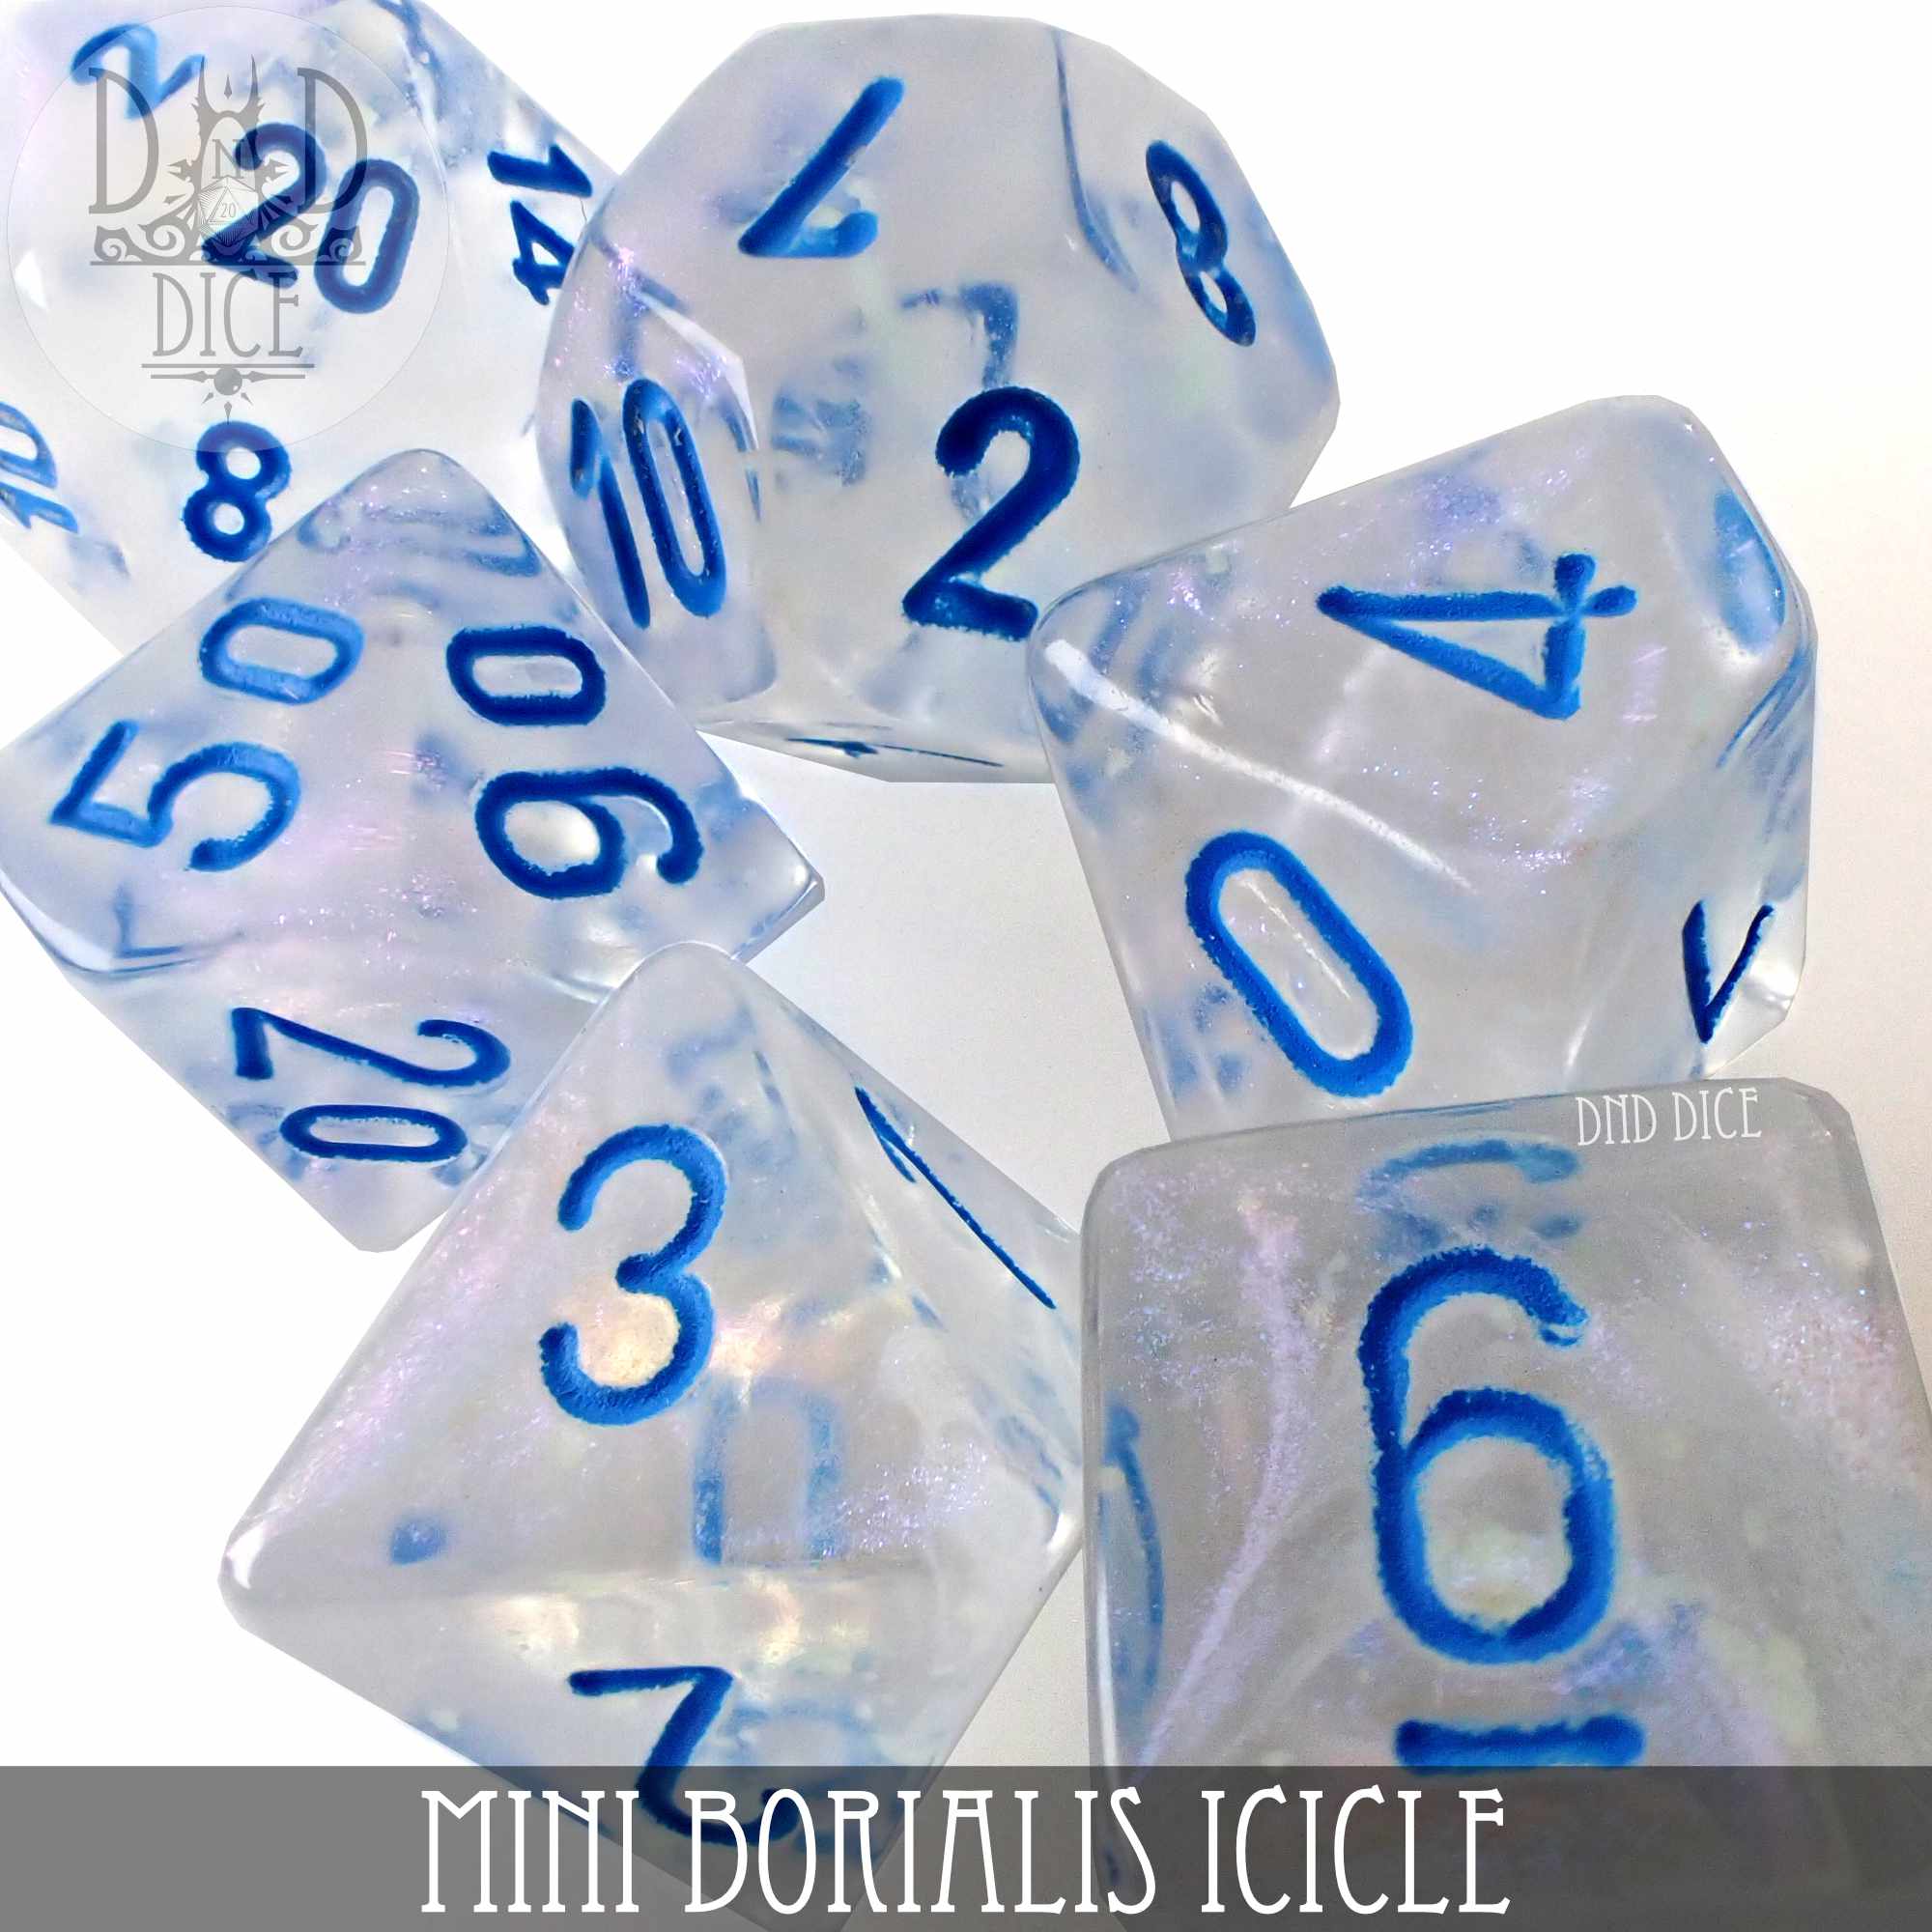 Dice roll paint by number part… I've lost count #paintbynumber #dnddic